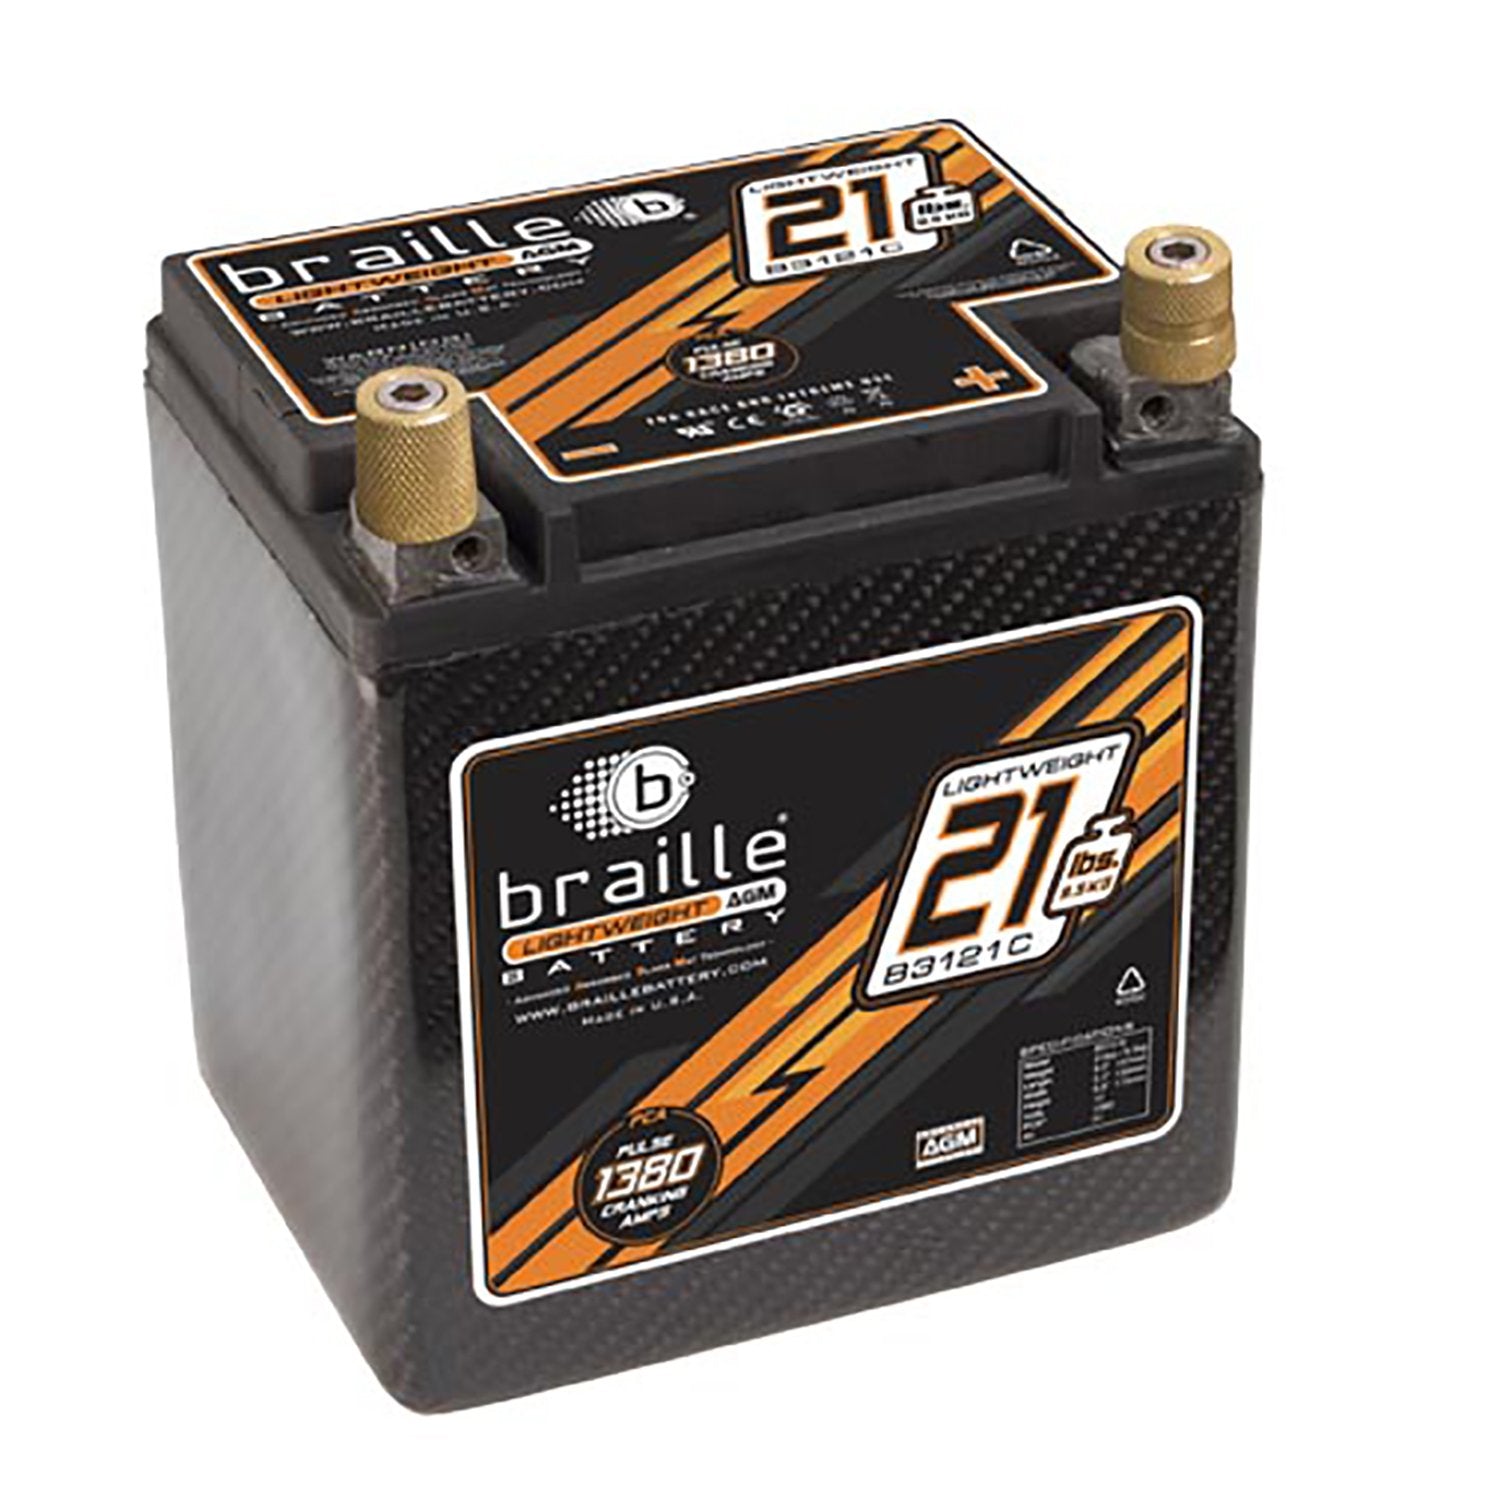 Braille Carbon Lightweight AGM battery - 21lbs